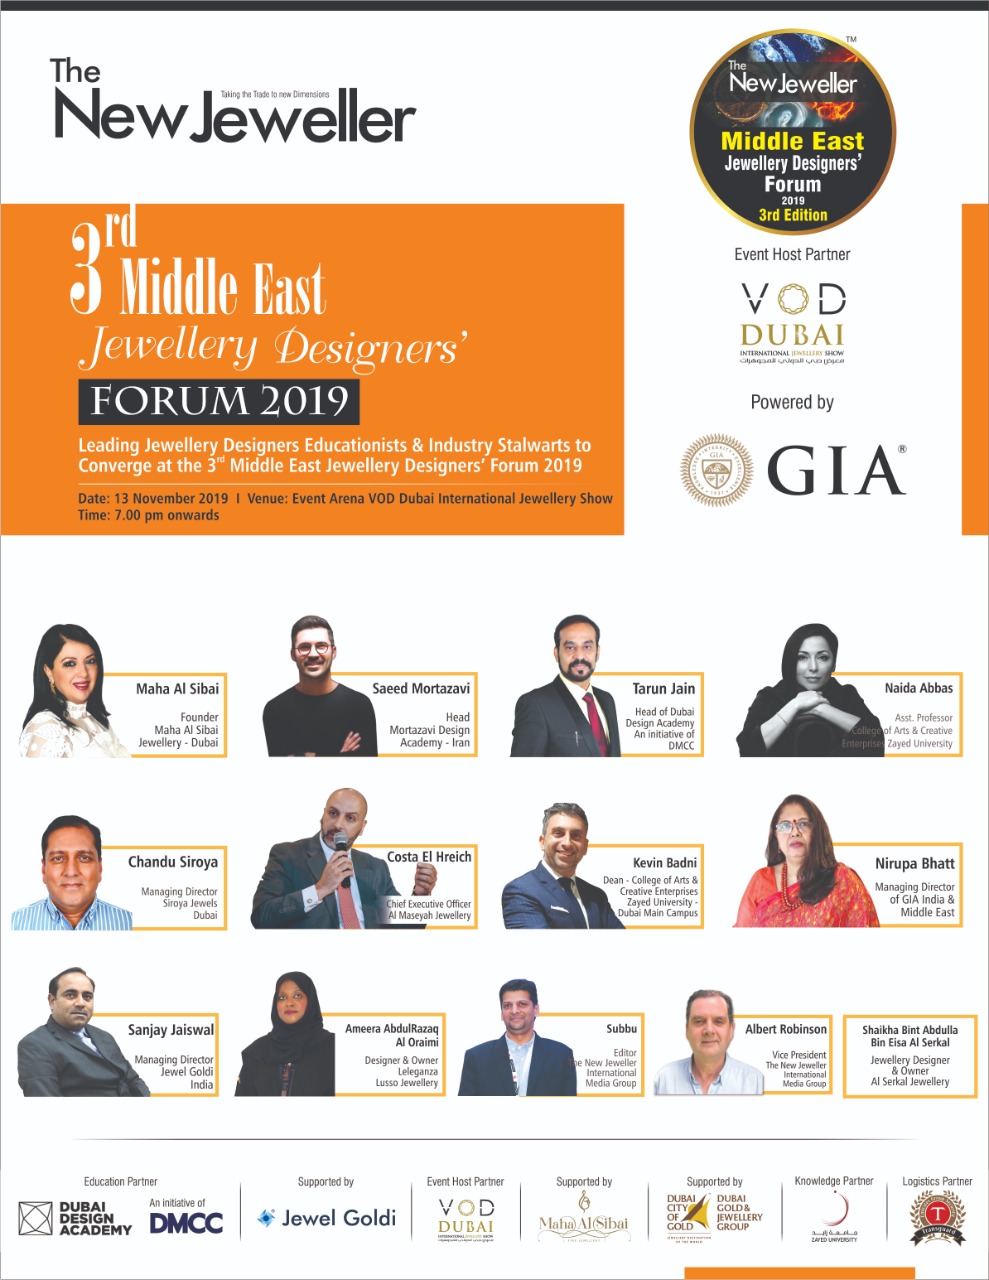 THE NEW JEWELLER MIDDLE EAST JEWELLERY DESIGNERS’ FORUM 2019